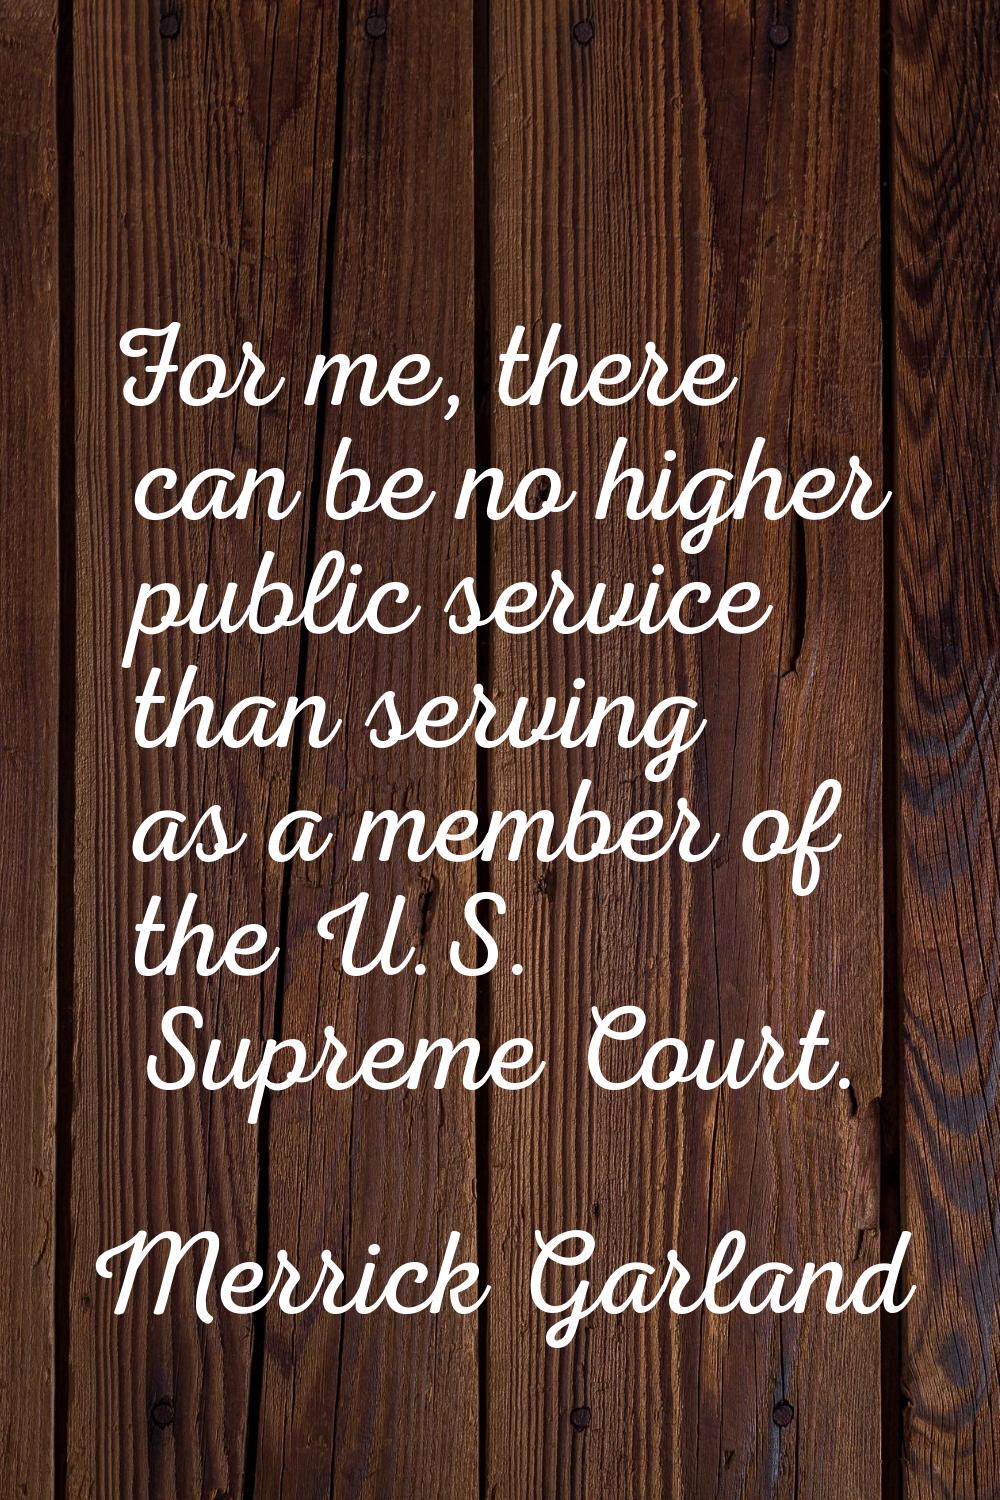 For me, there can be no higher public service than serving as a member of the U.S. Supreme Court.